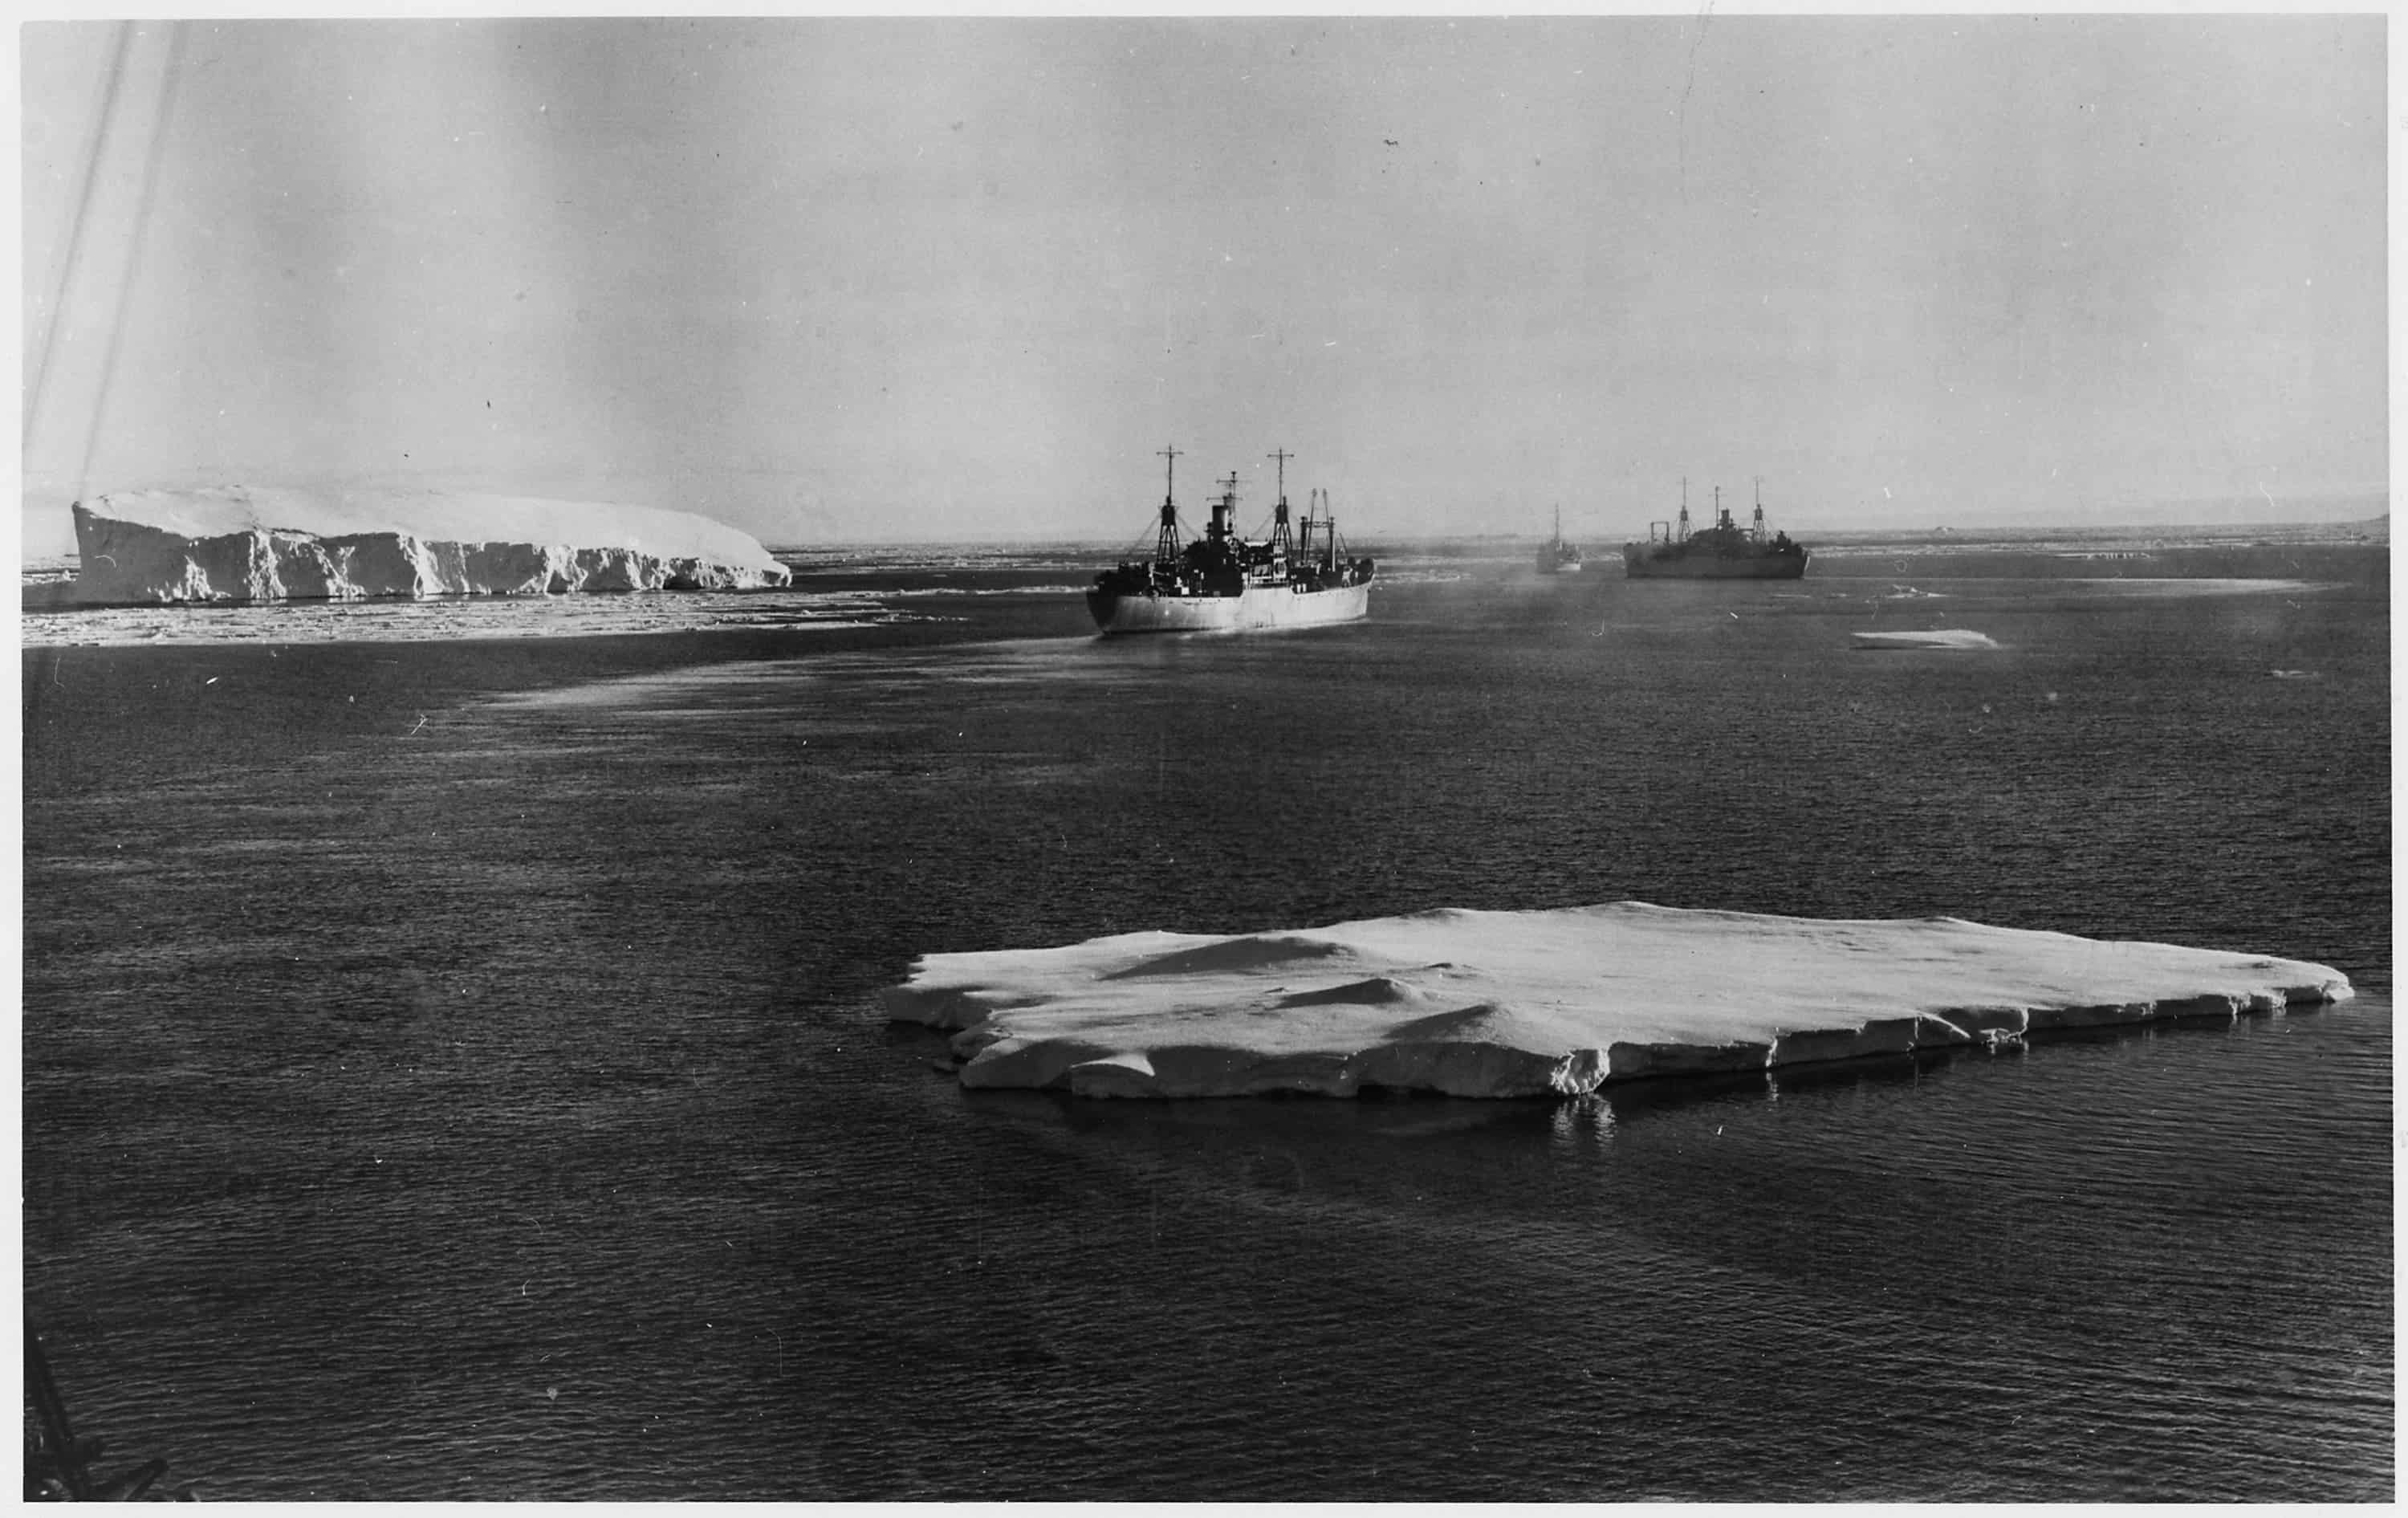 A U.S. expedition to the Antarctic. Image credits: U.S. National Archives and Records Administration.